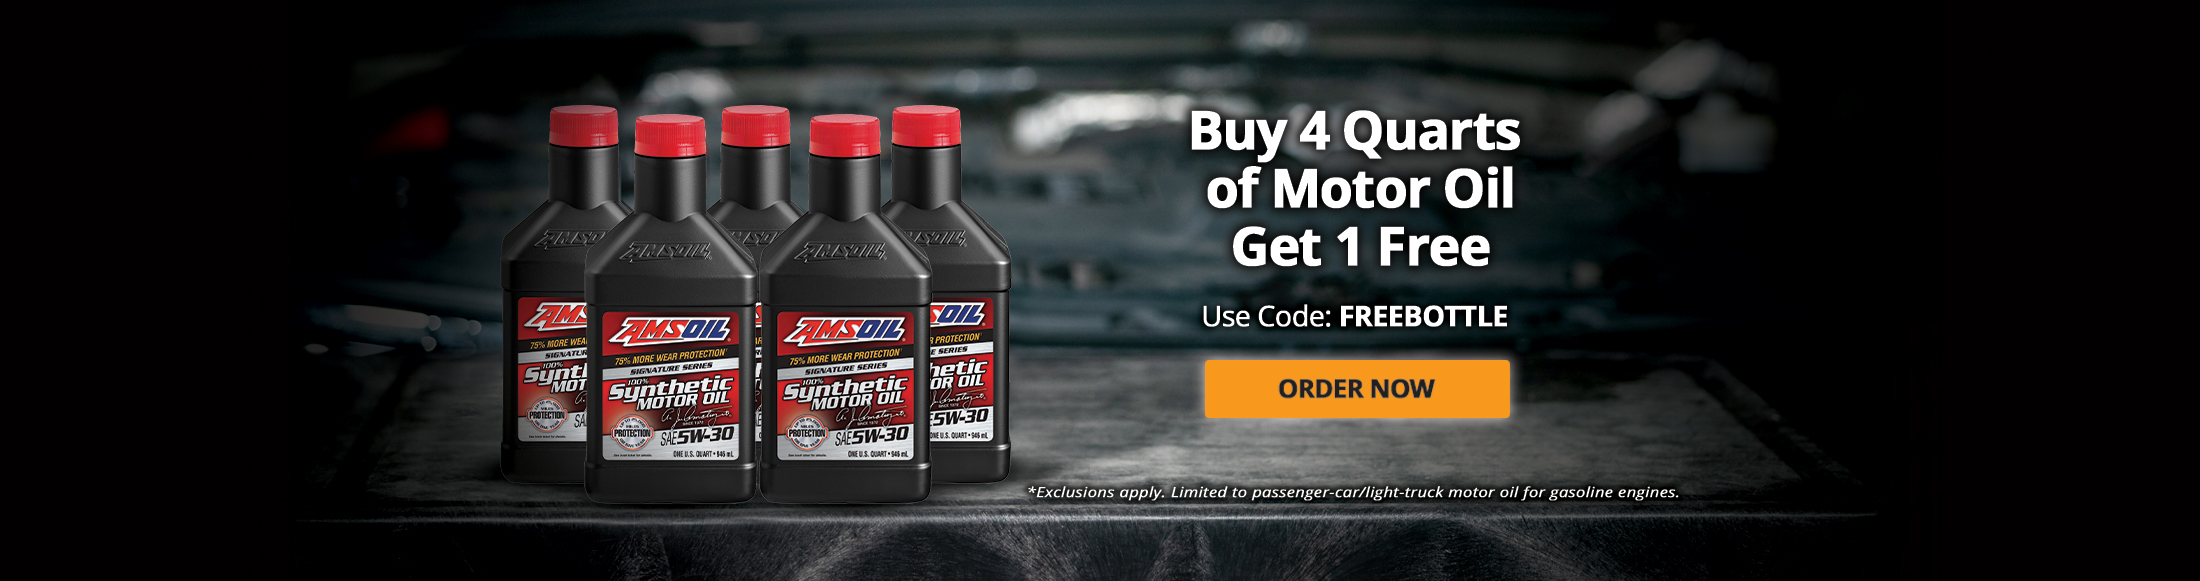 Buy 4 Quarts of Motor Oil Get 1 Free. Use Code: FREEBOTTLE. Order Now. *Exclusions apply. Limited to passenger-car/light-truck motor oil for gasoline engines.